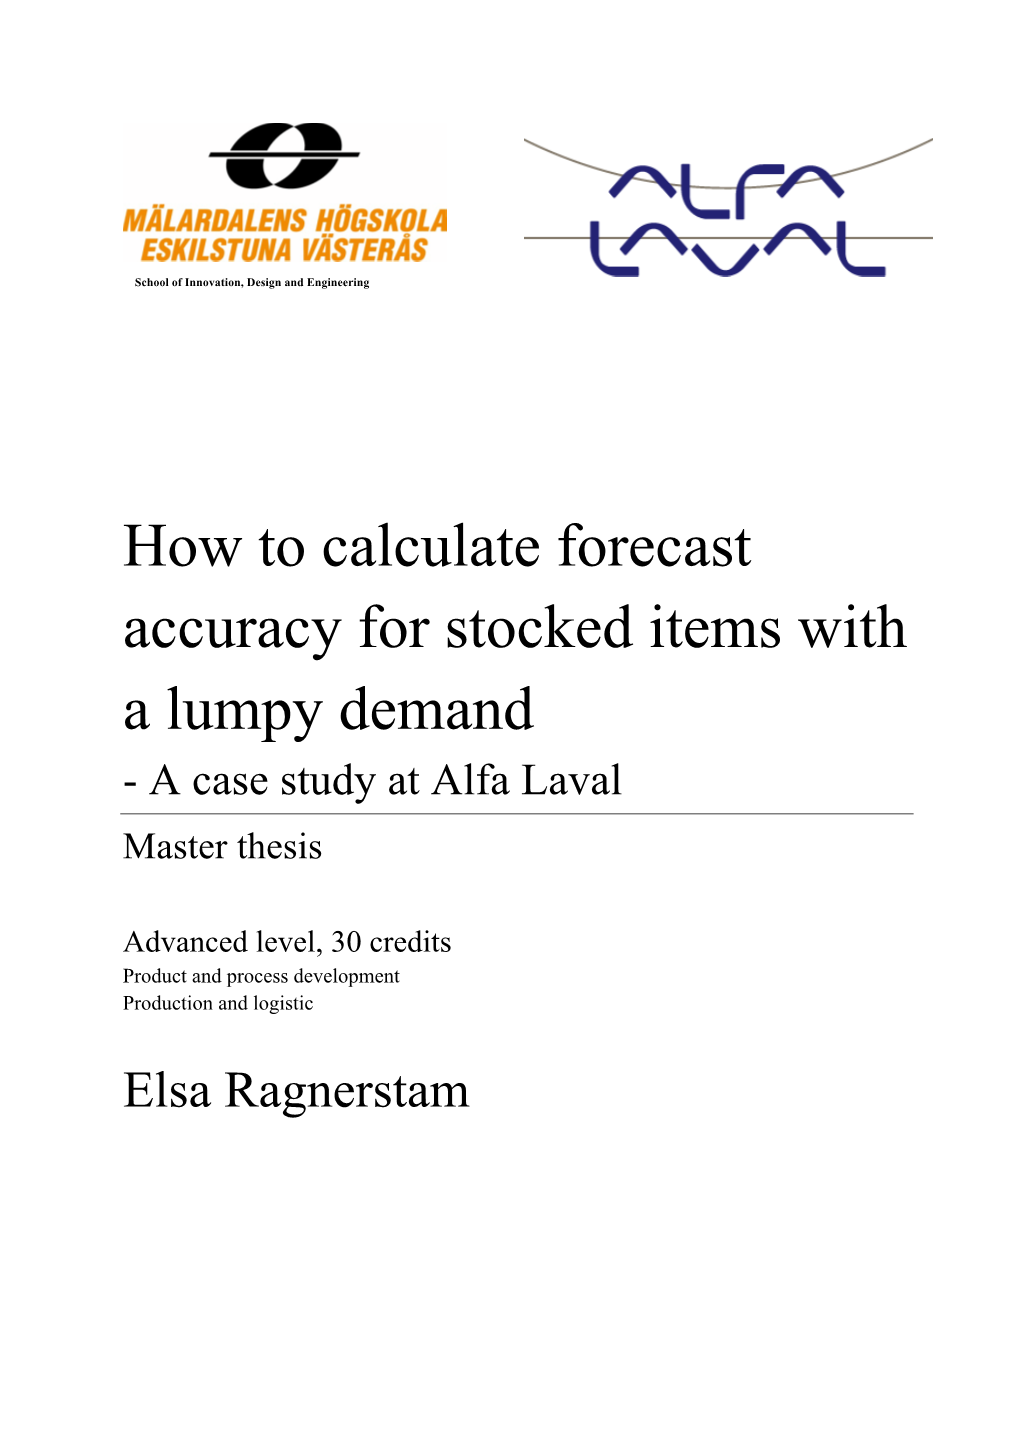 How to Calculate Forecast Accuracy for Stocked Items with a Lumpy Demand - a Case Study at Alfa Laval